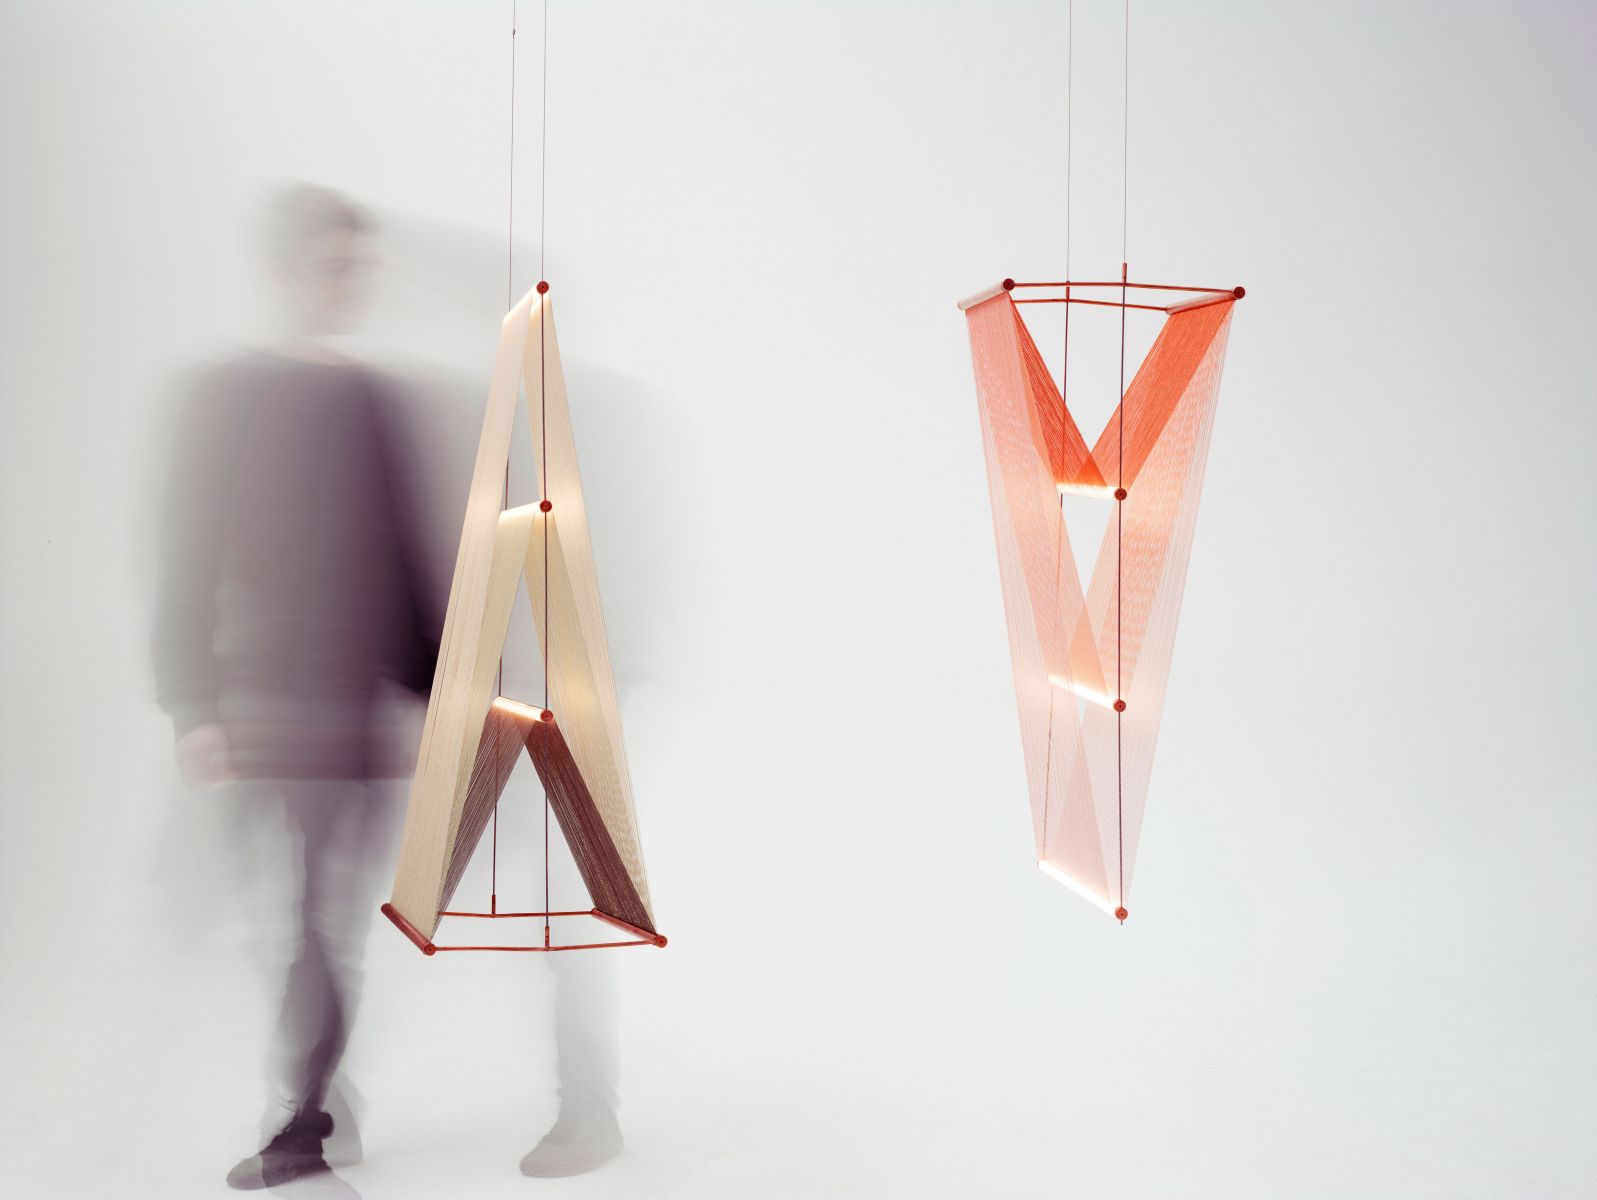 Spun Prism by Umut Yamac. Copper, Mercerised cotton, Stainless steel